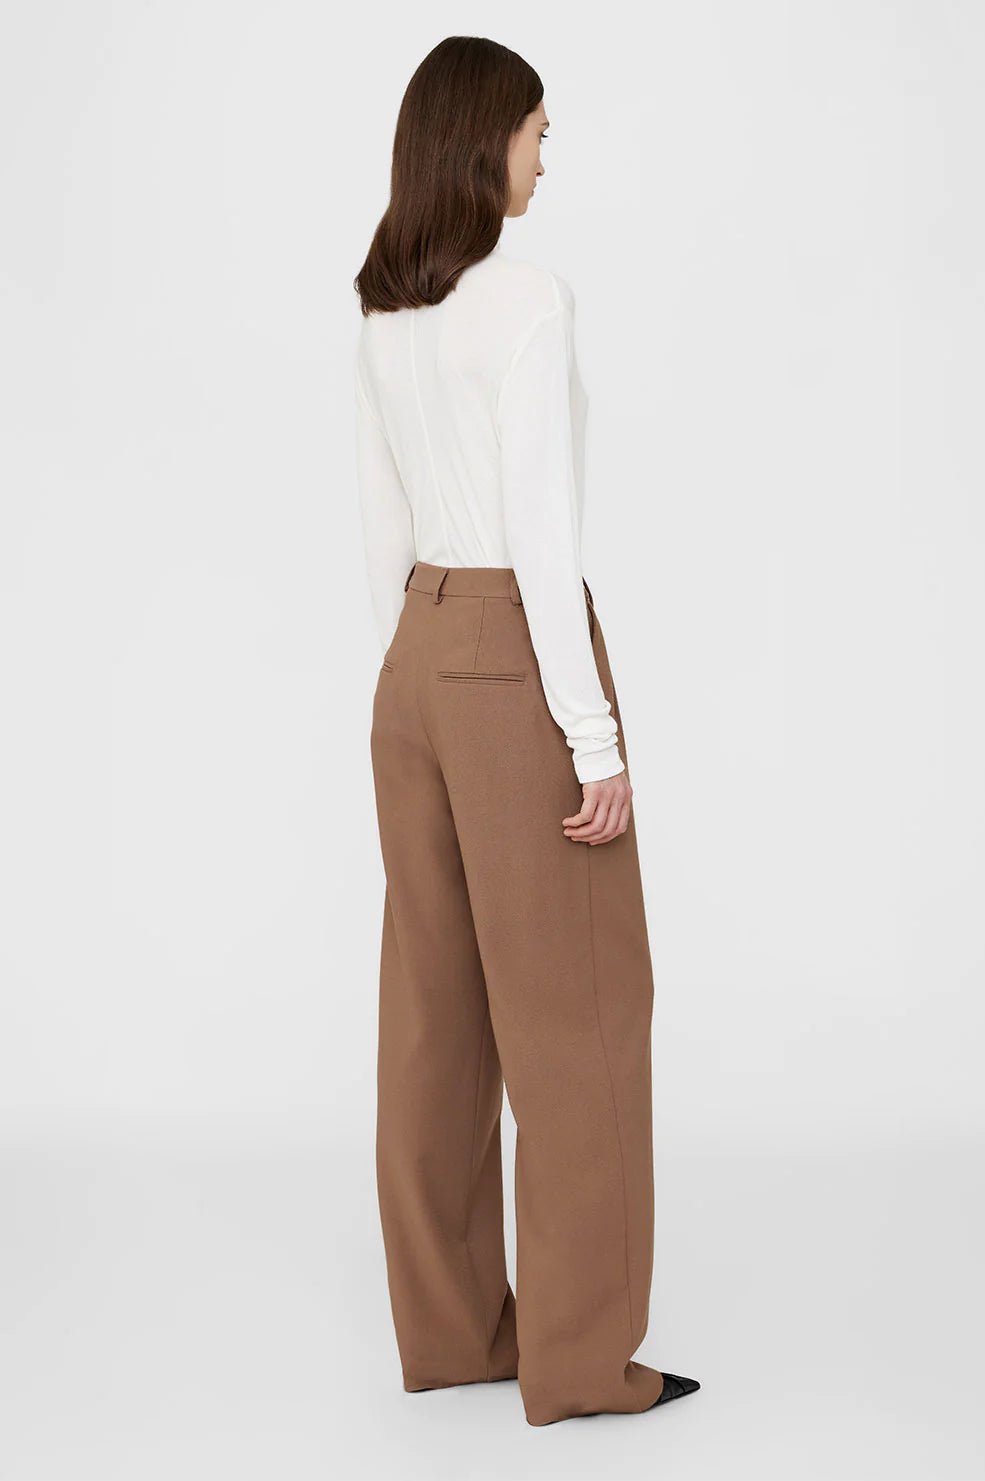 Anine Bing Carrie Pant - Camel Twill